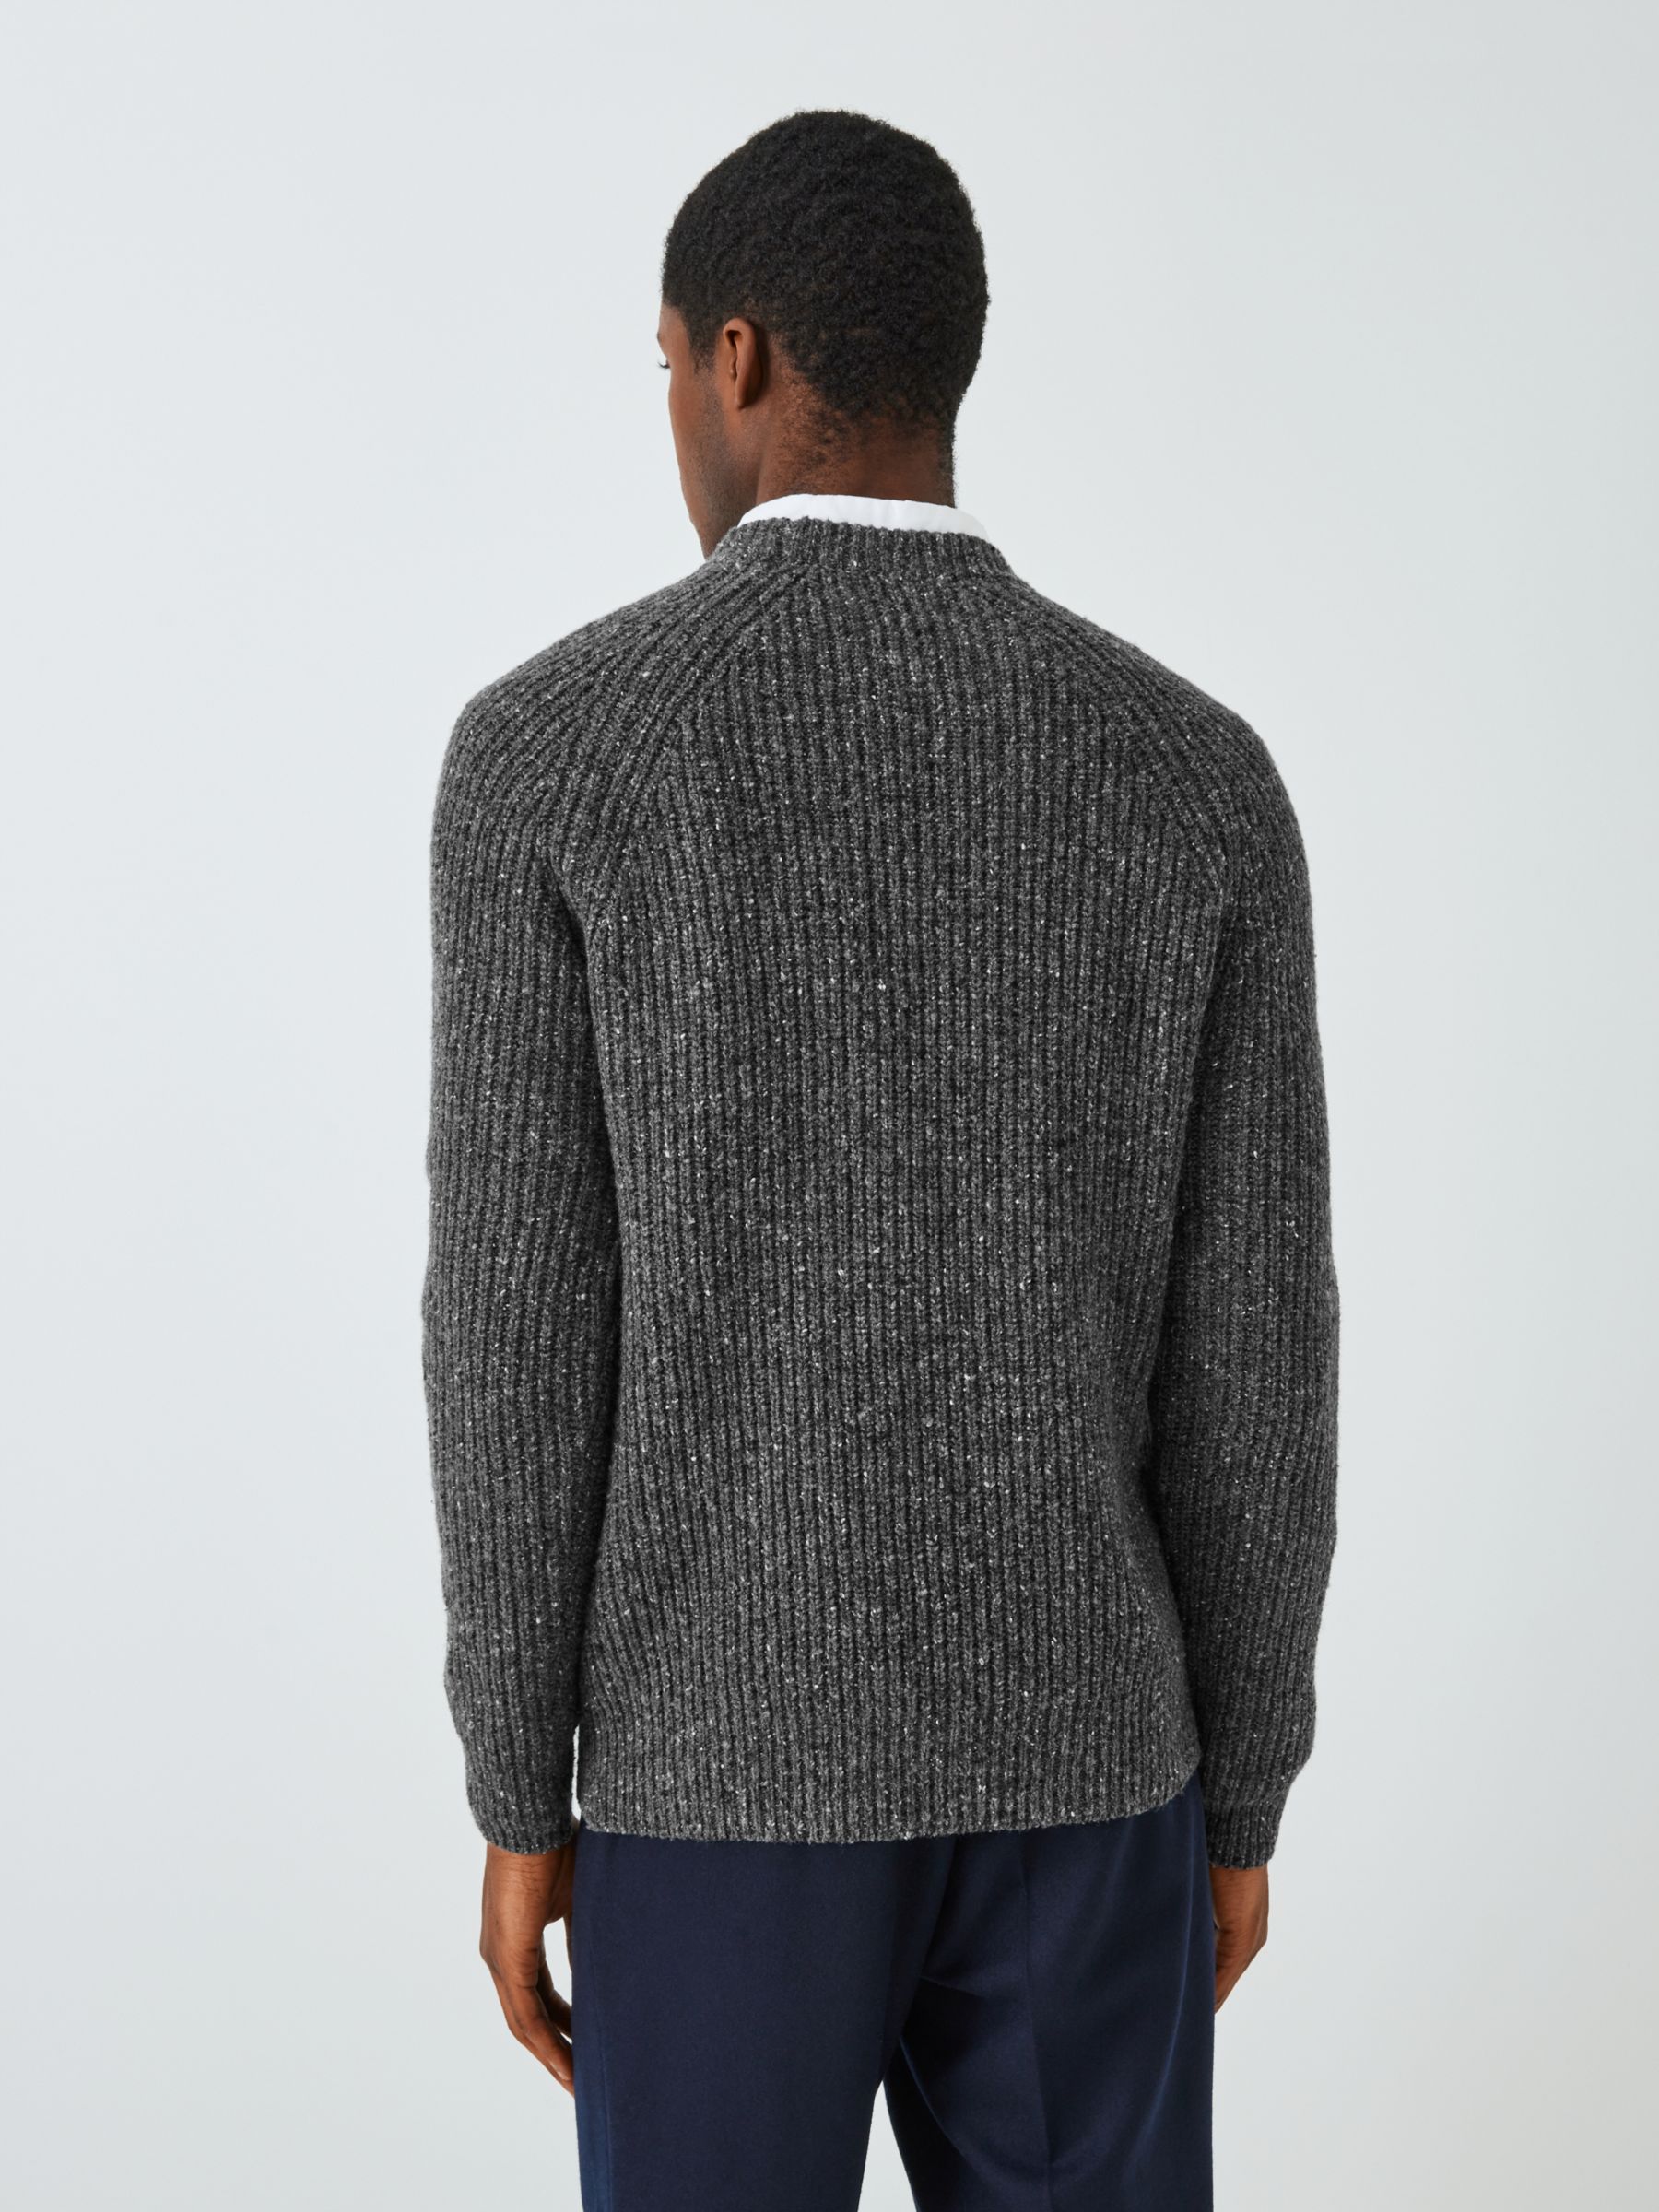 Buy John Lewis Made in Italy Wool Blend Donegal Look Rib Crew Neck Jumper Online at johnlewis.com